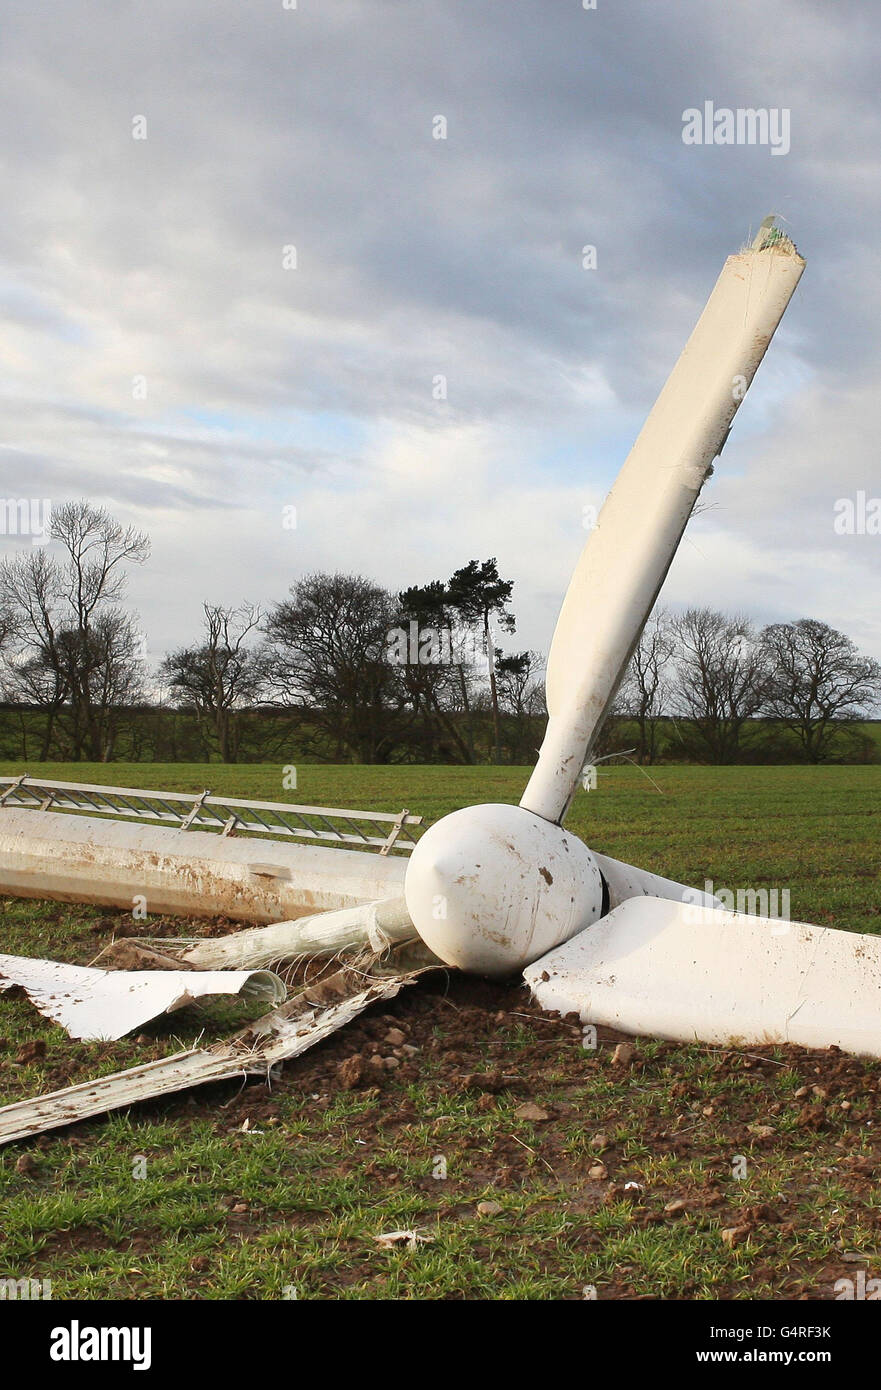 A wind turbine near Coldingham, Scotland, is seen on its side after hurricane-force winds closed schools, cut off power to tens of thousands of homes, and forced rescue missions in parts of Britain. Stock Photo